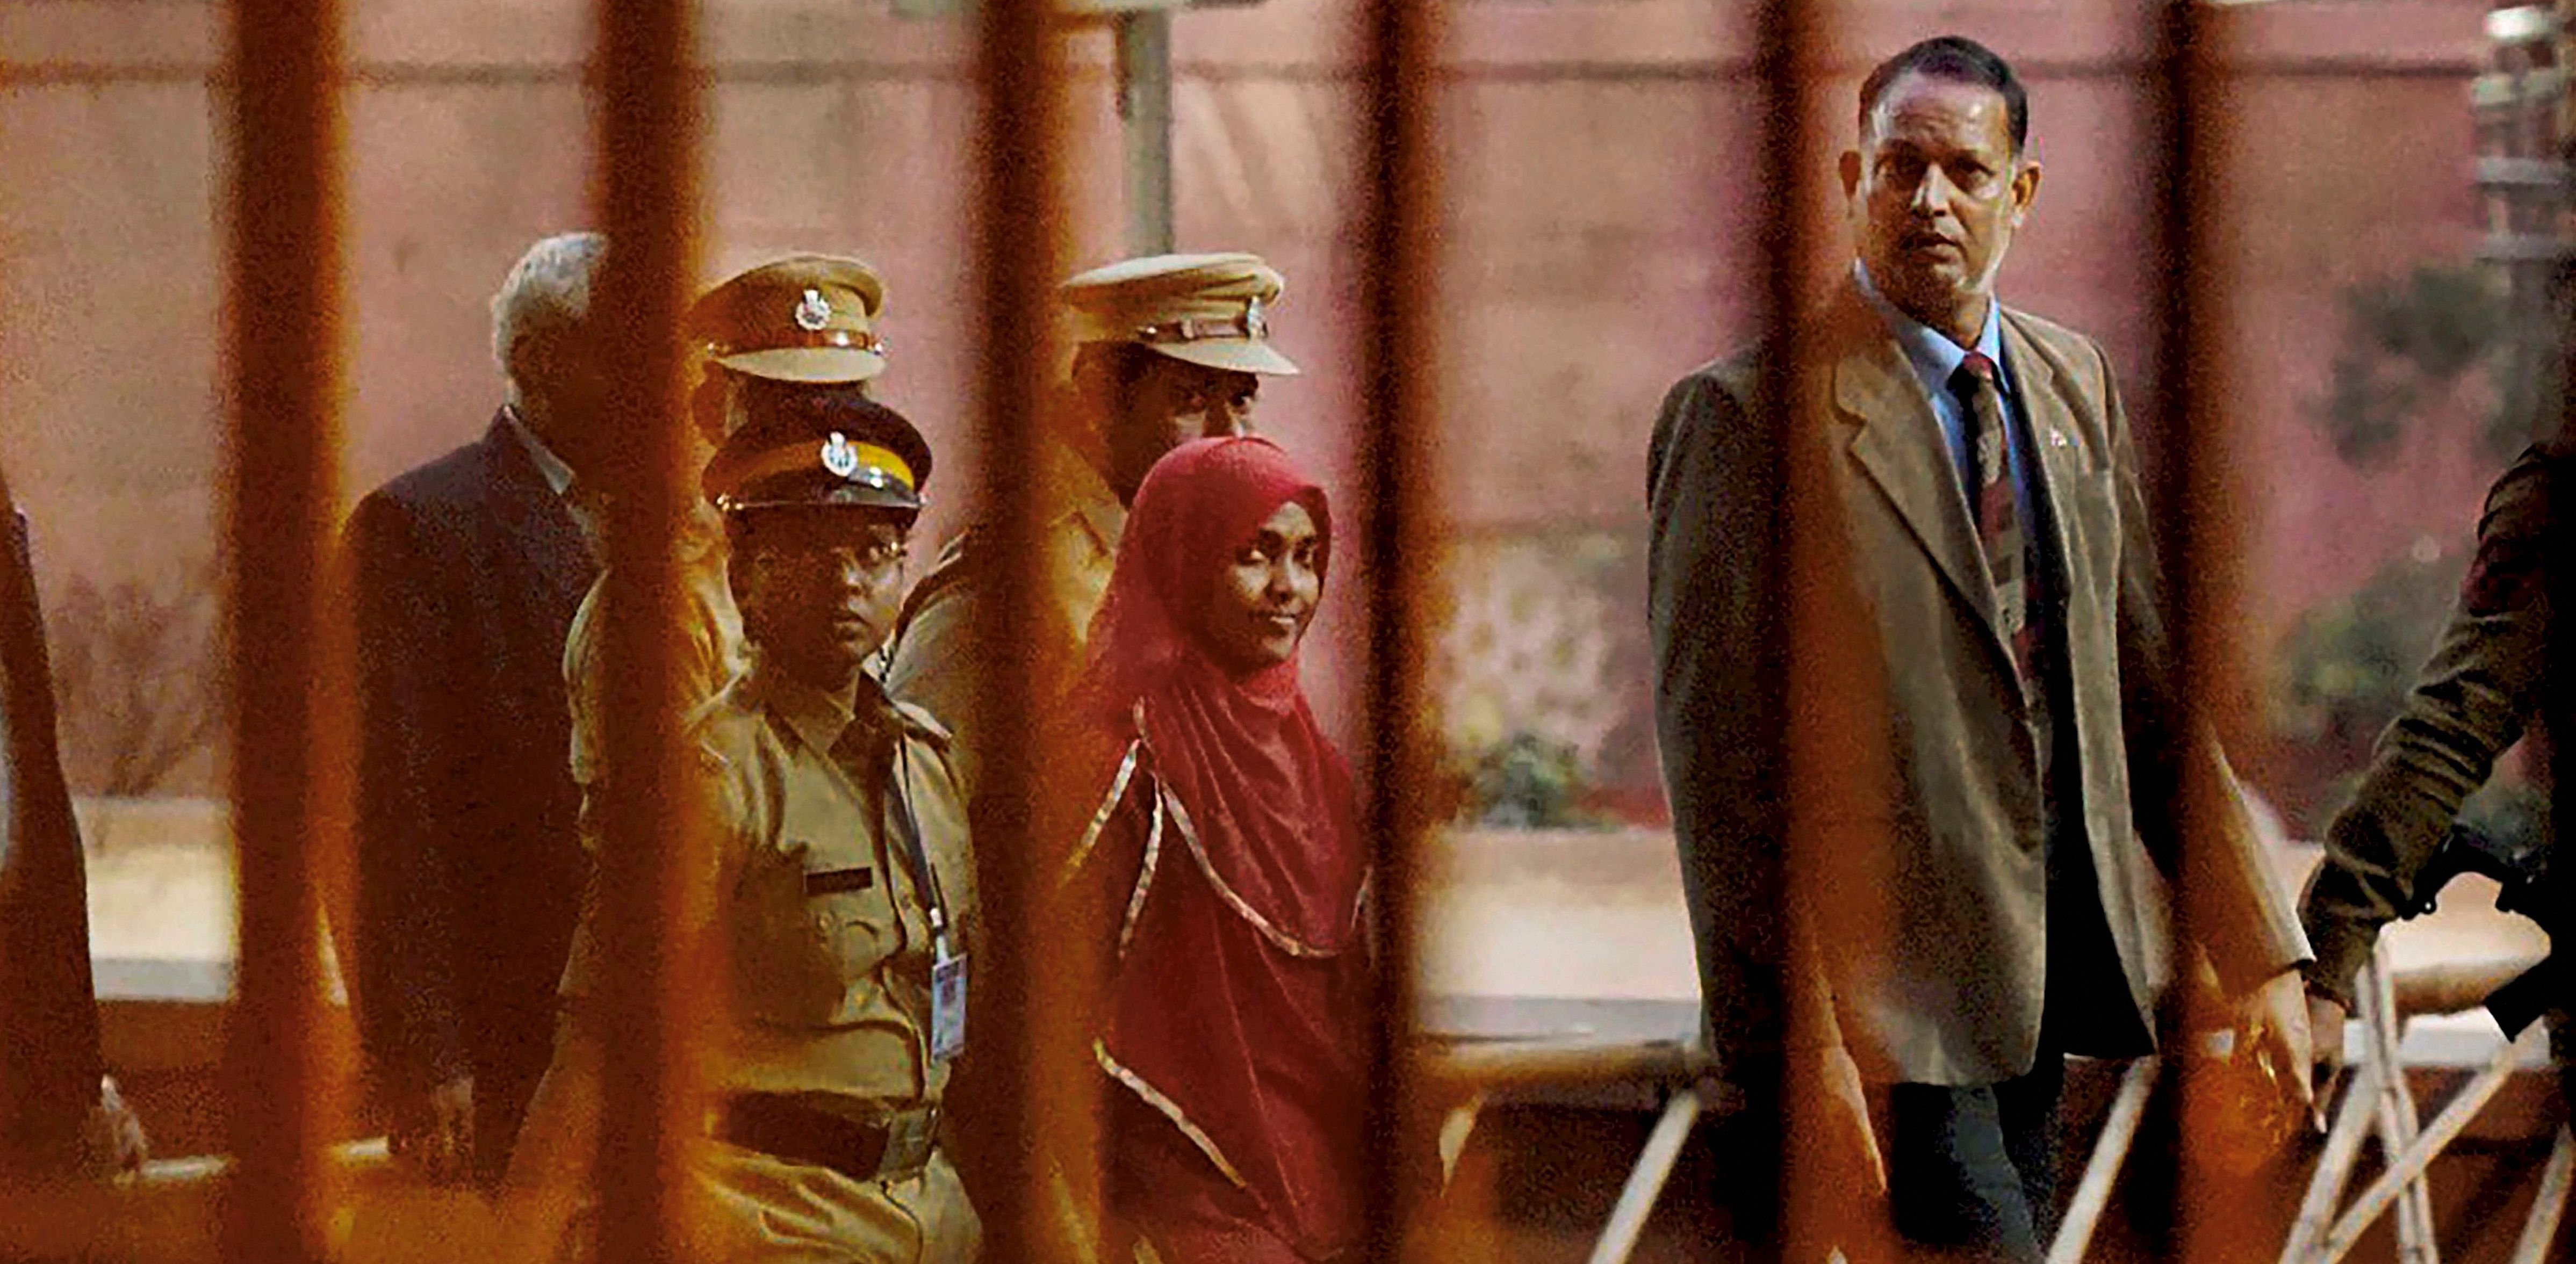 Hadiya, a 24-year-old Hindu woman from Kerala who converted to Islam, leaves the Supreme Court in New Delhi after a hearing in the Kerala 'Love Jihad' case on Monday. Credit: PTI Photo